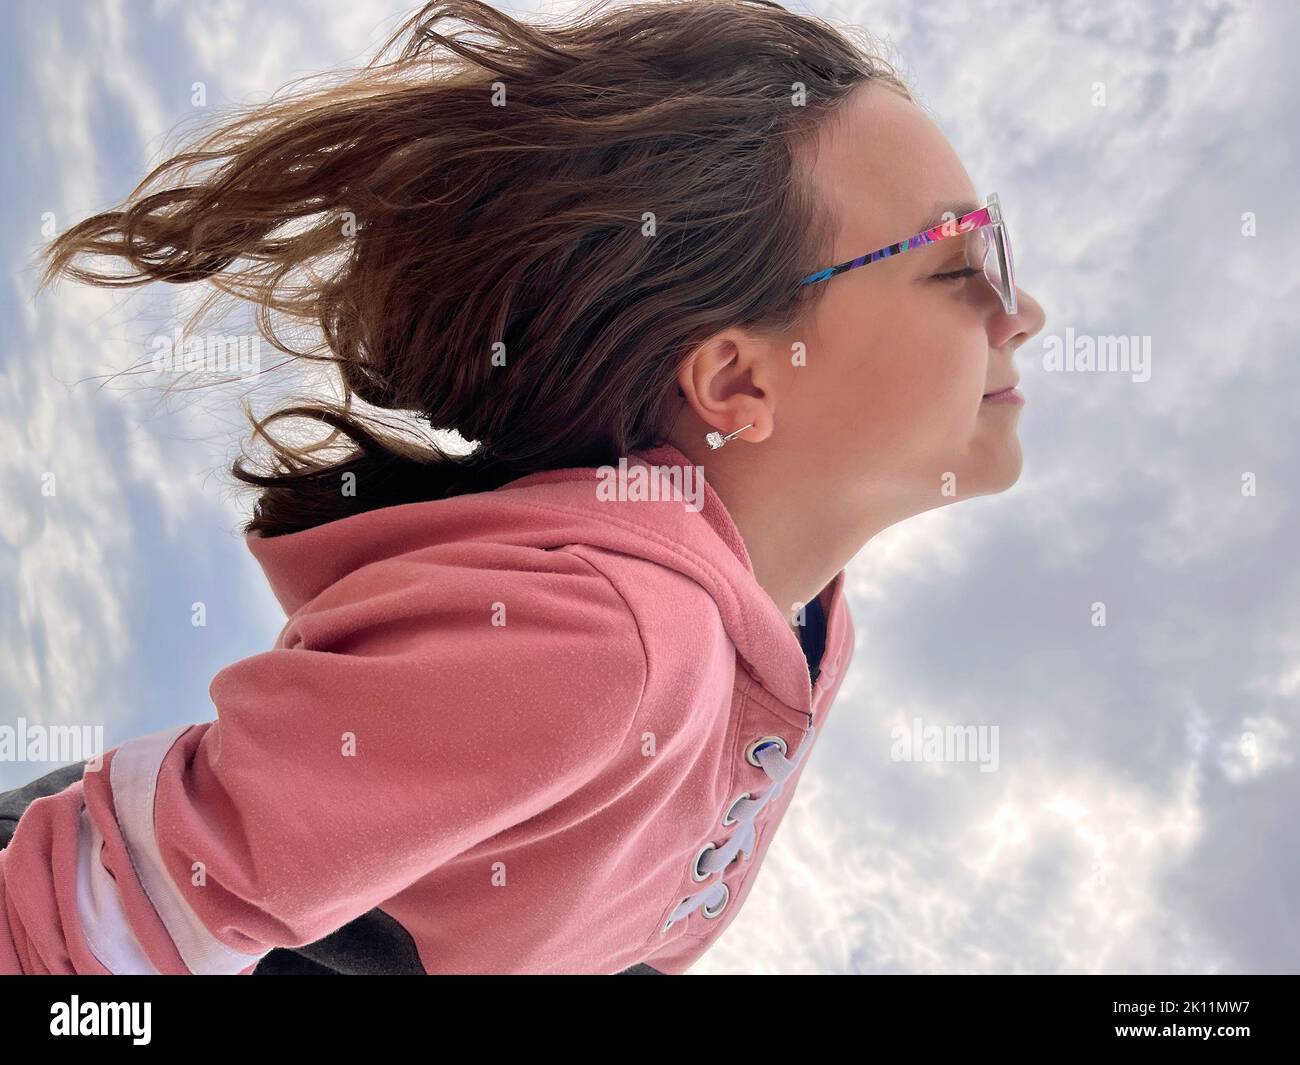 Young teenager girl portrait flying concept Stock Photo